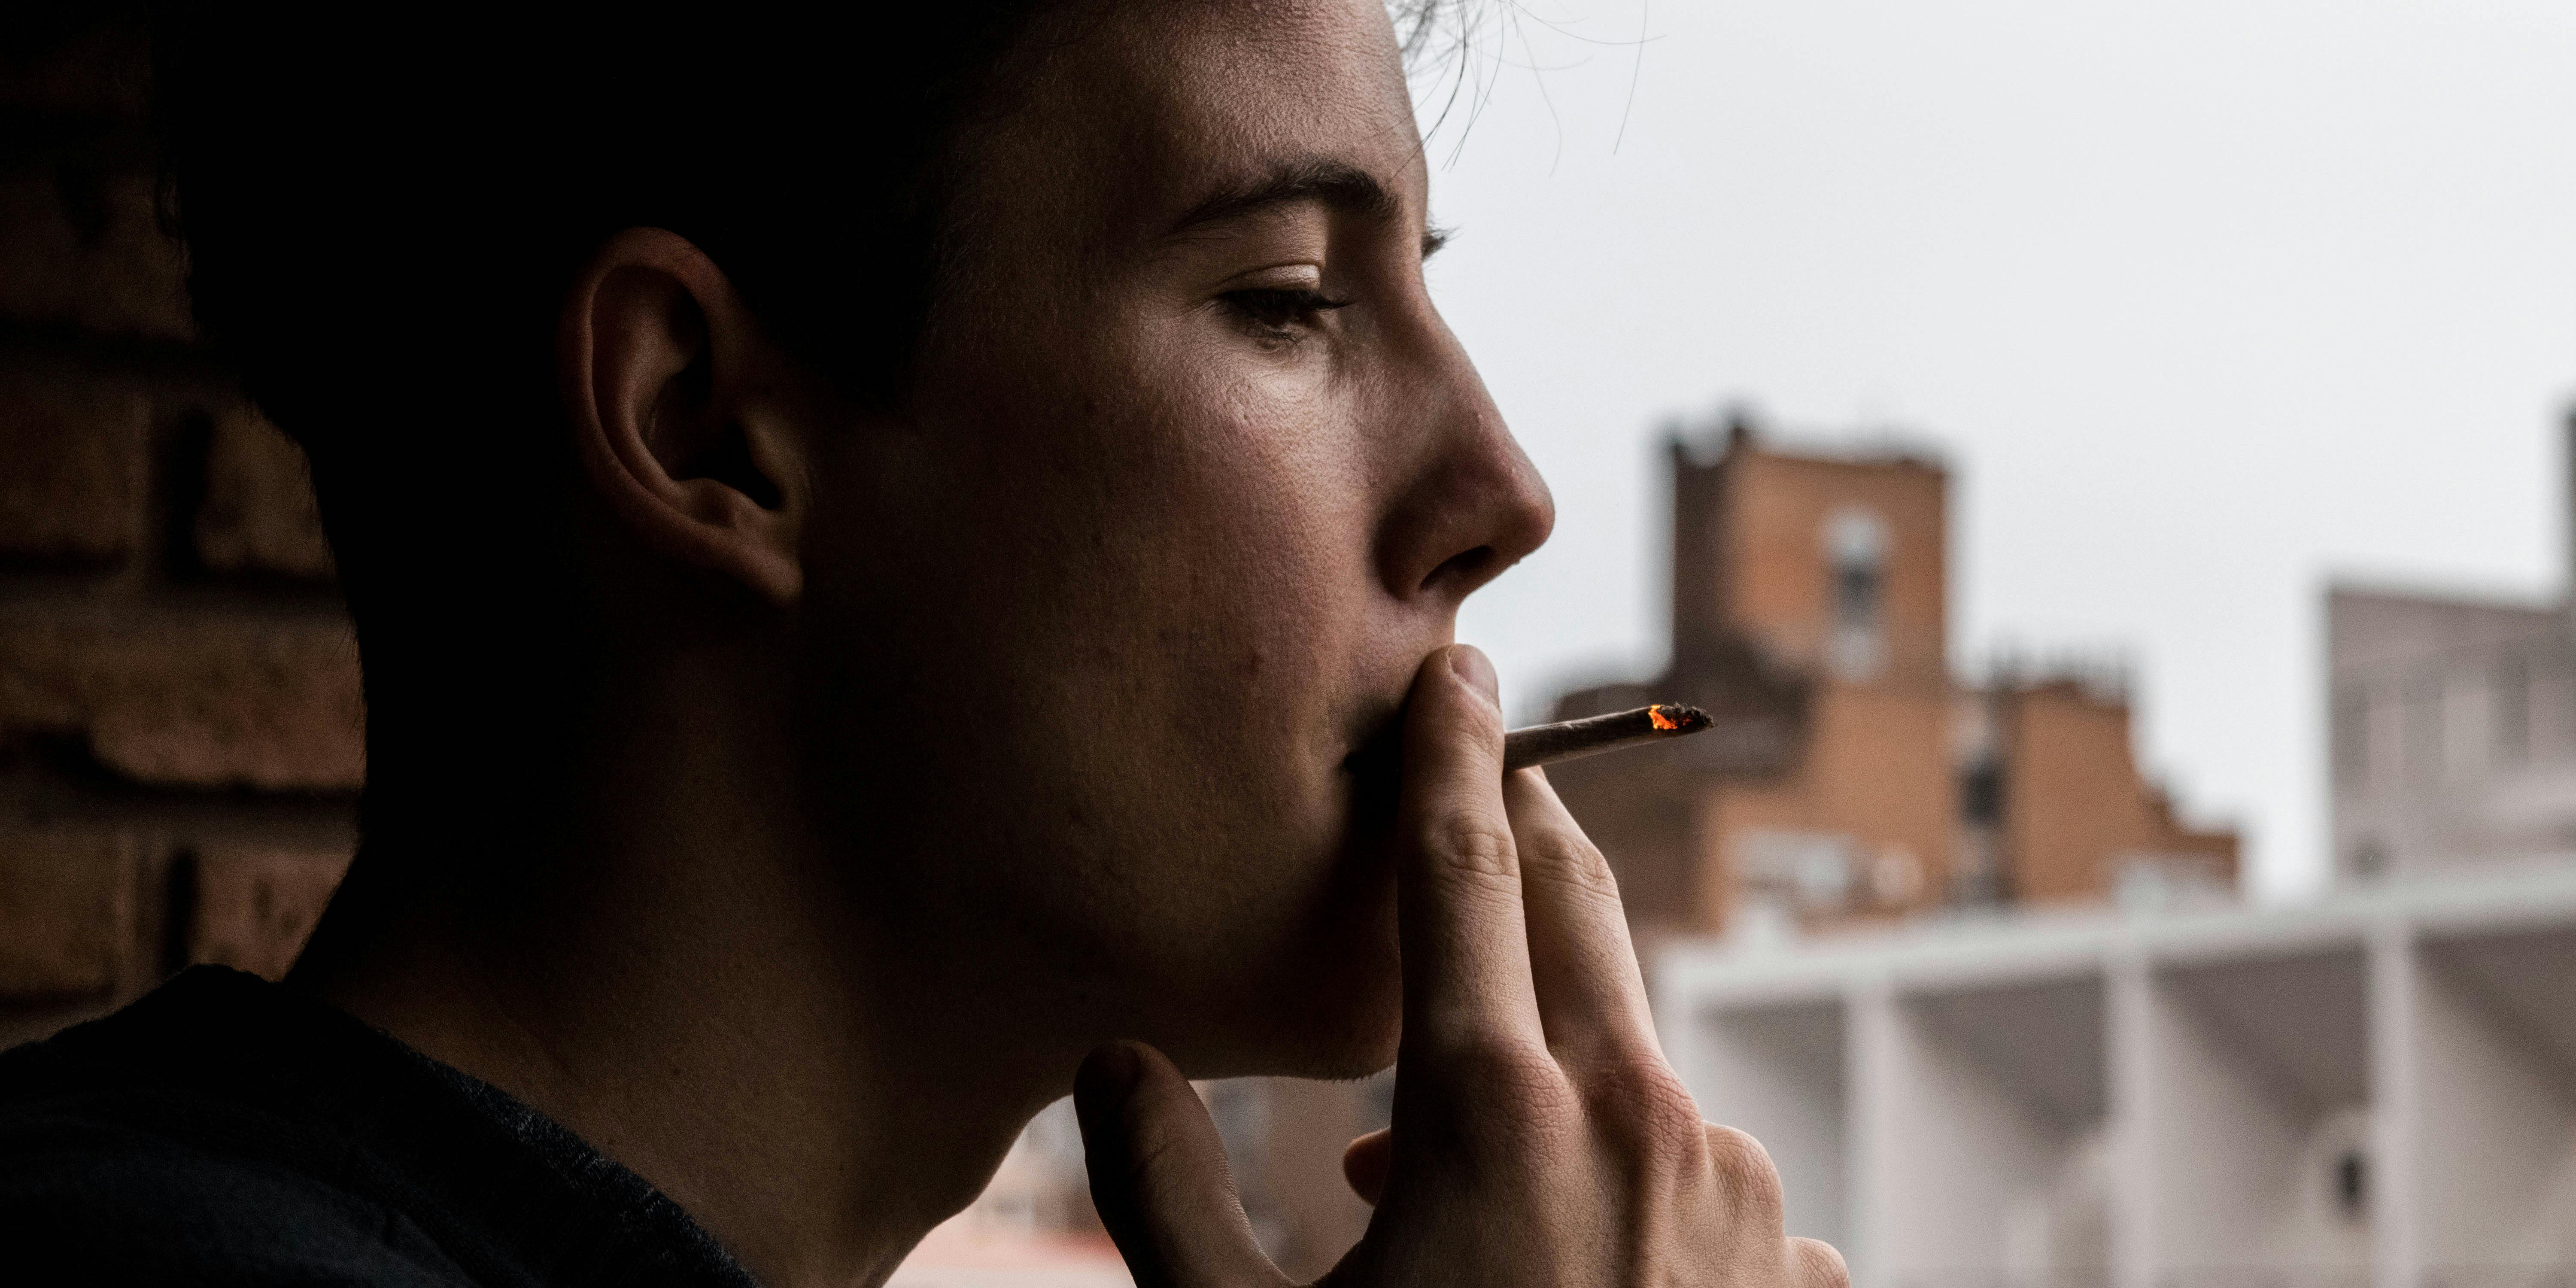 Synthetic Cannabis Study Leads to Misleading Coverage About the Risks of Weed. Here, a man is shown smoking a joint